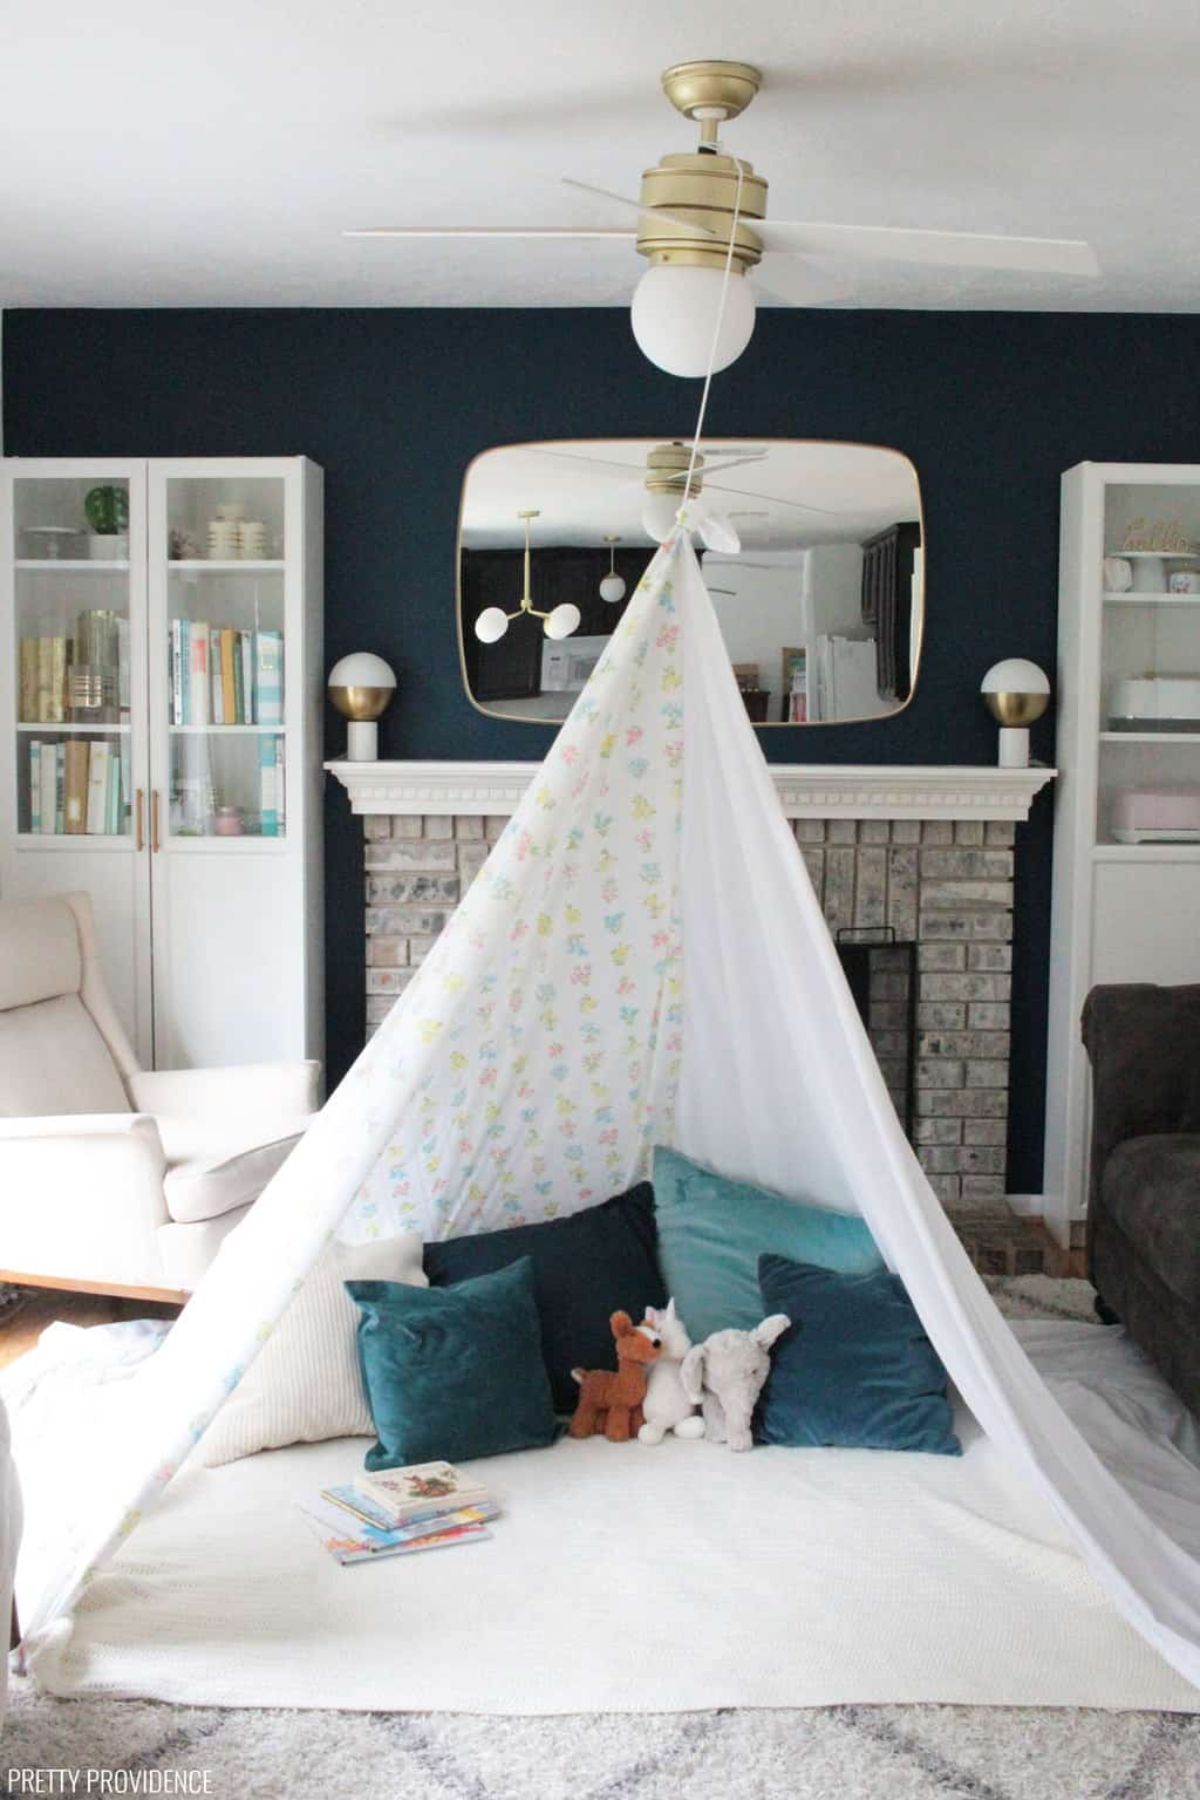 a blanket fort in a living room with cushions, soft toys and books inside